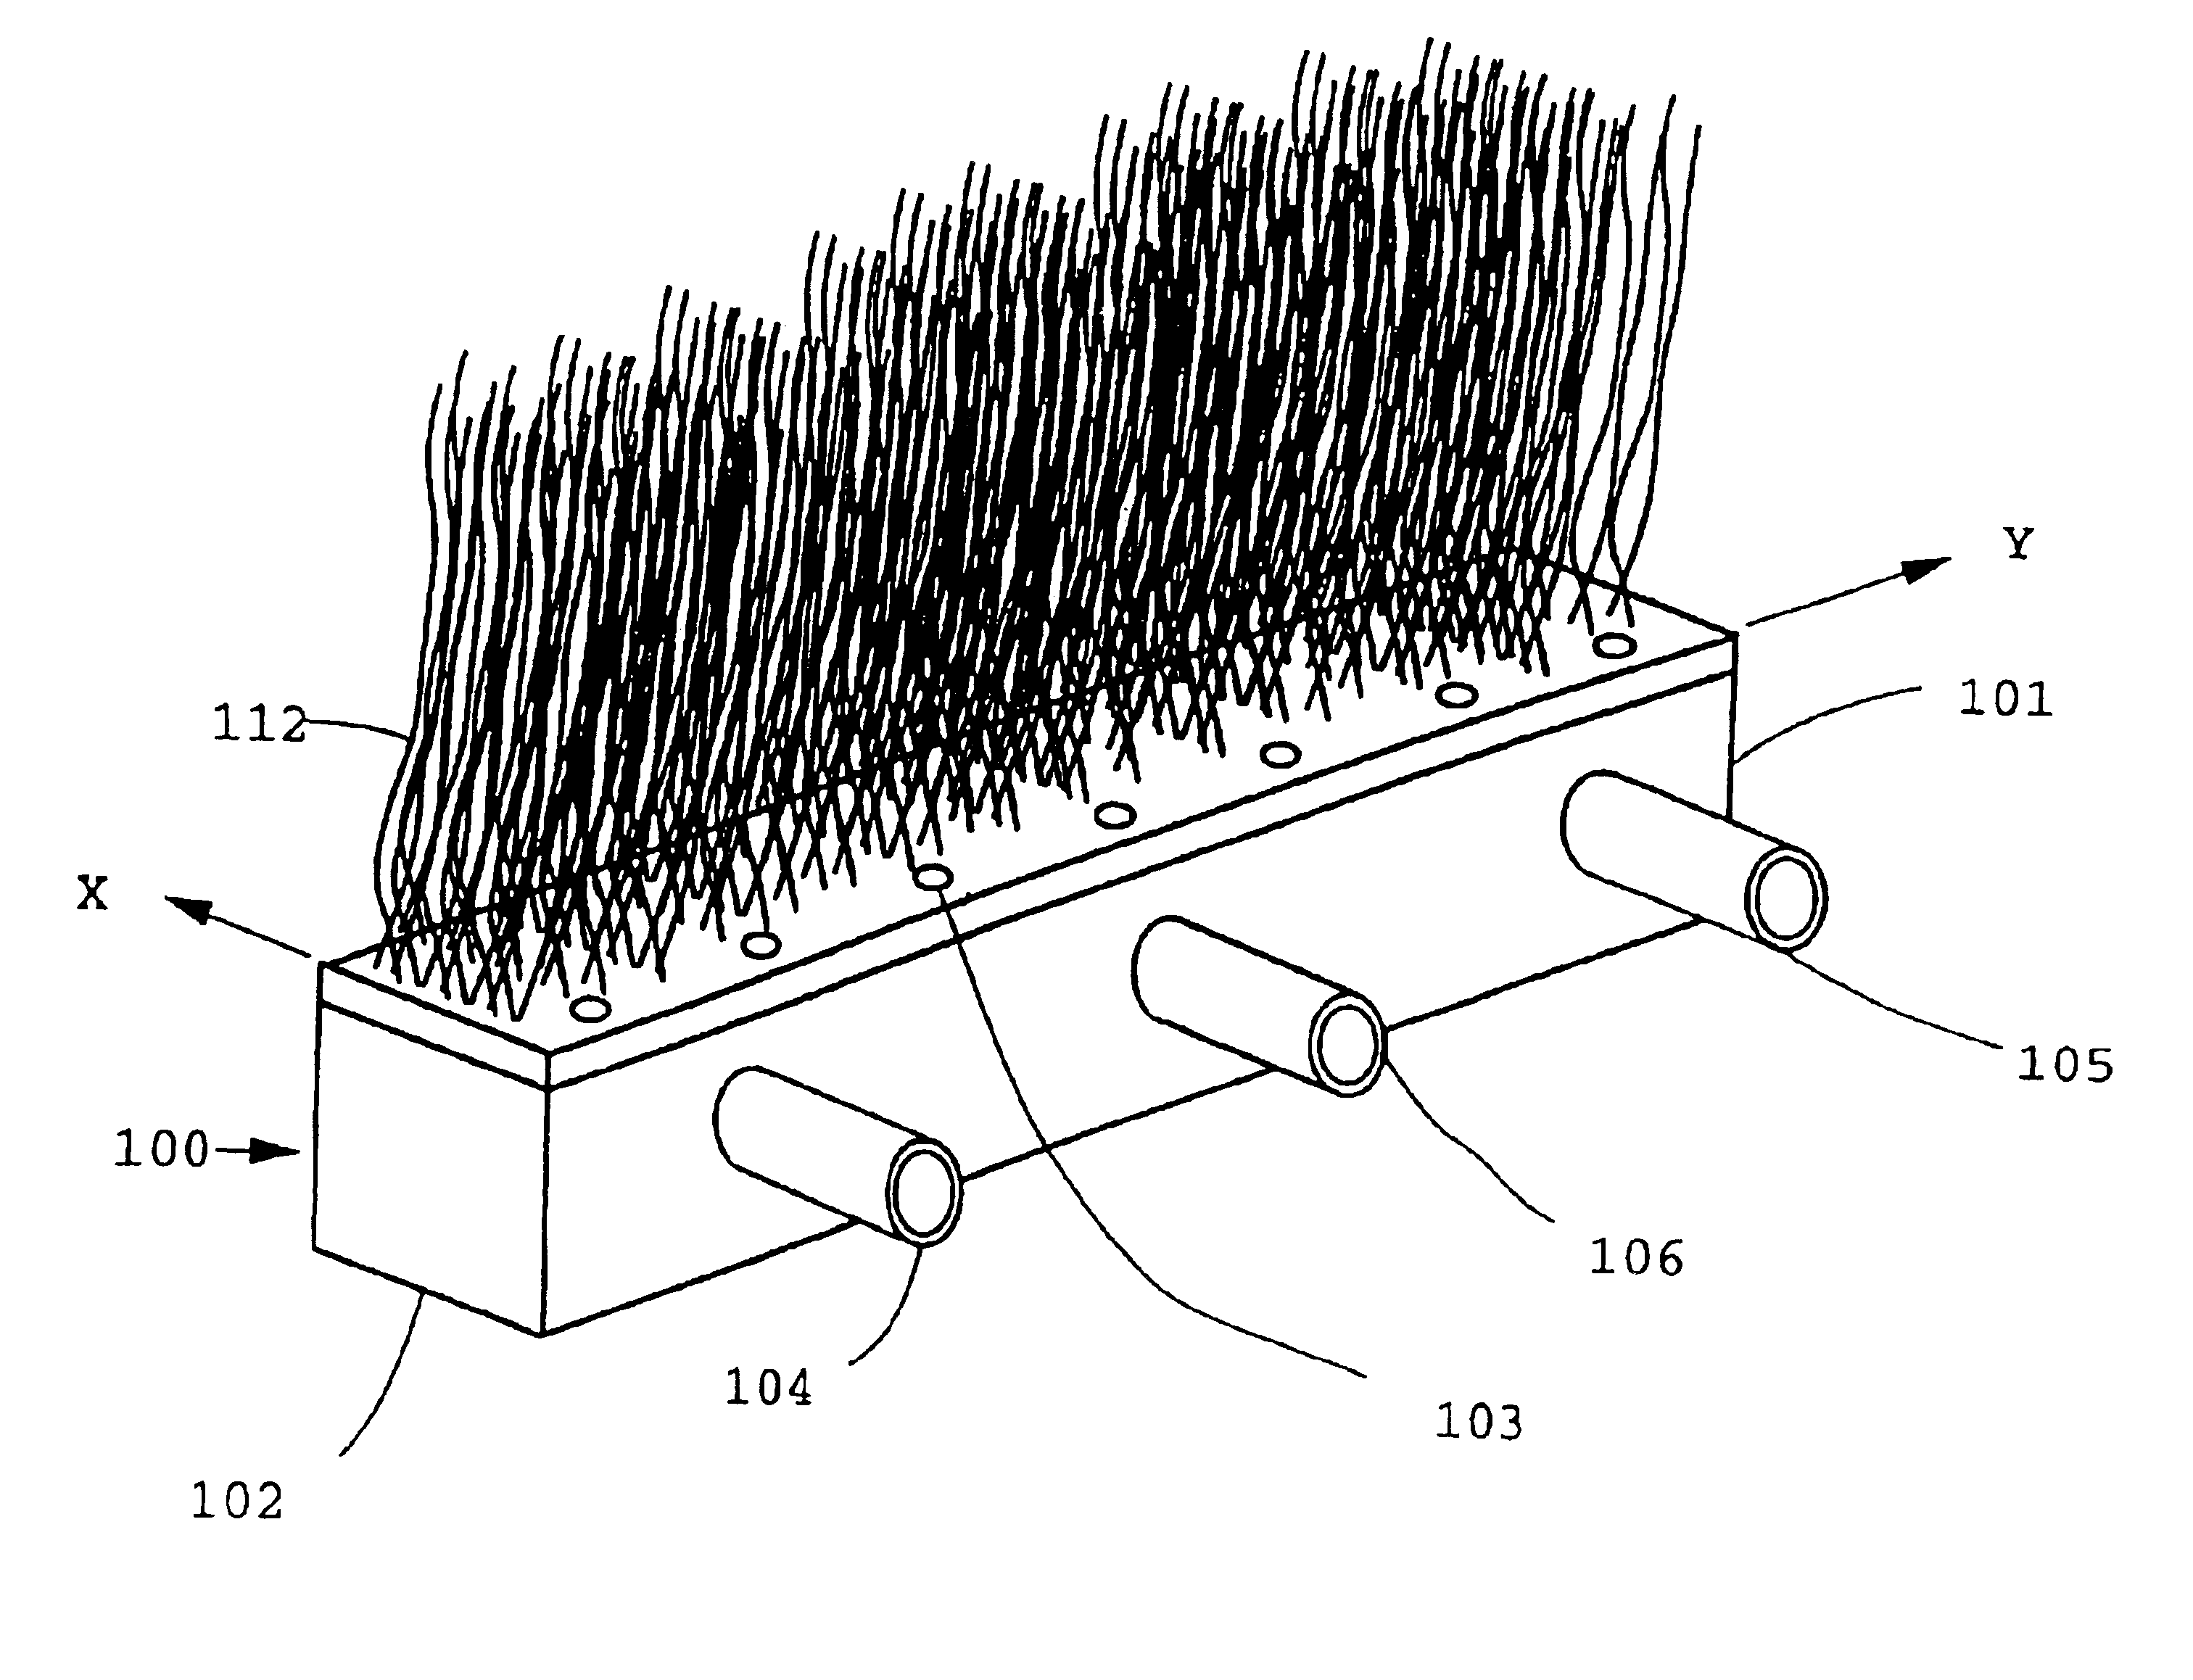 Apparatus incorporating potted hollow fiber membranes